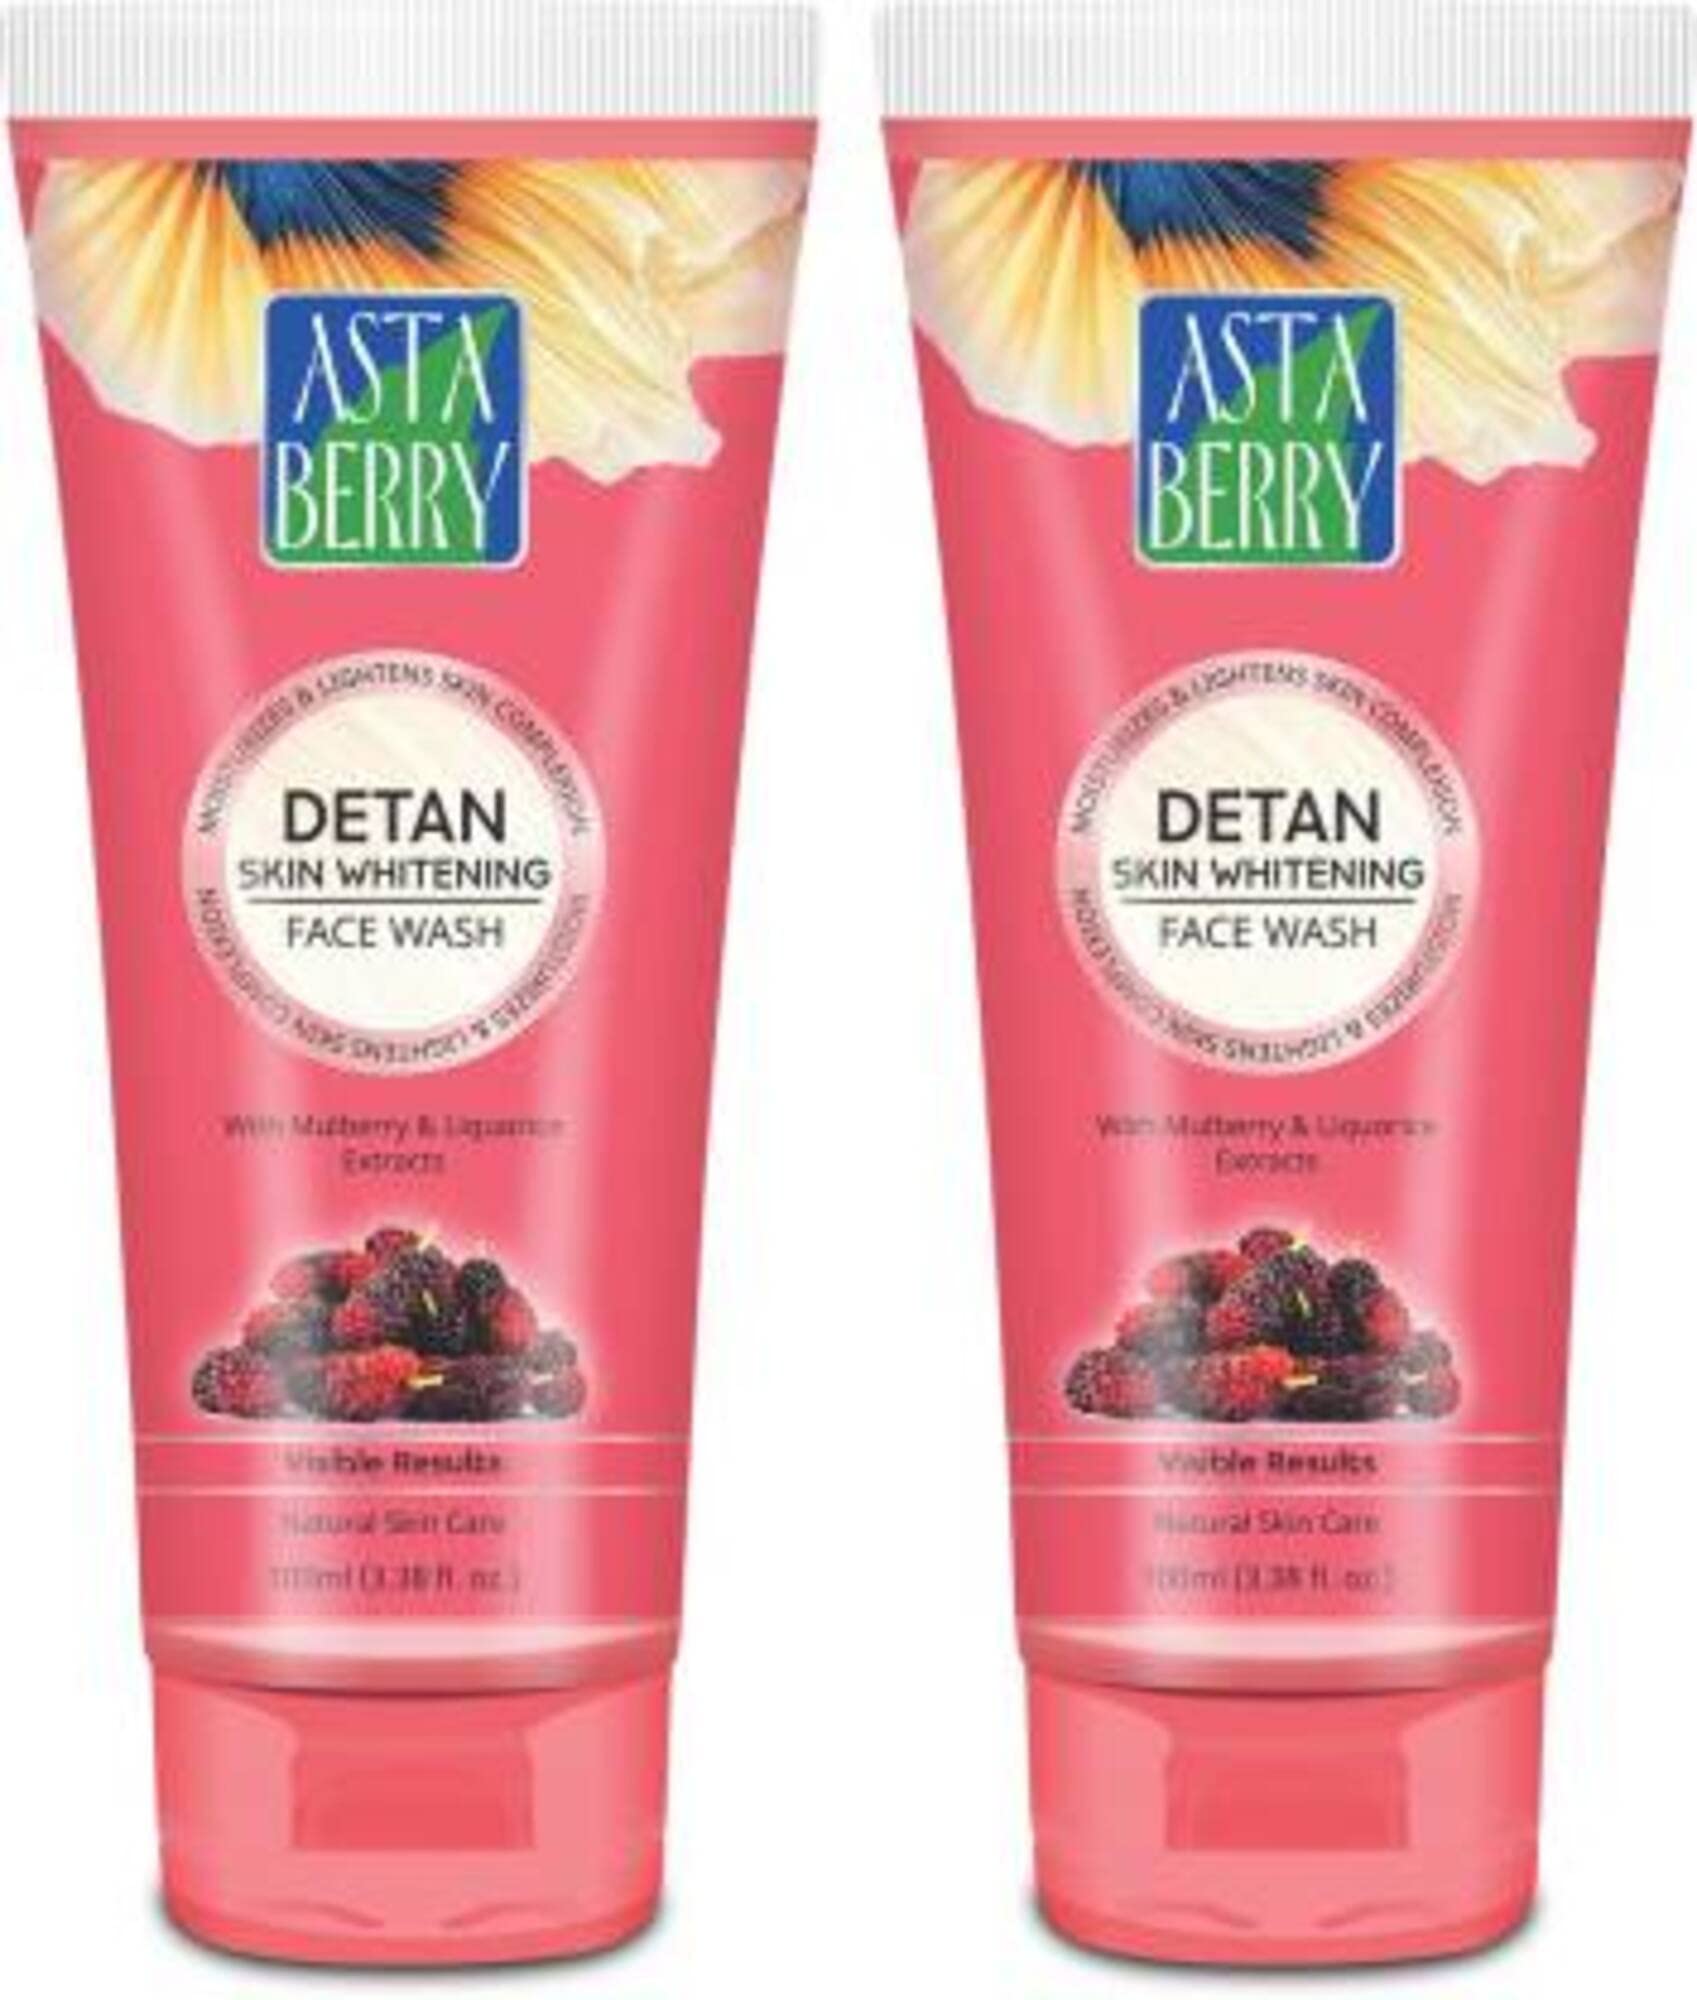 ASTABERRY FACE WASH SKIN WHIT COMBO 100M